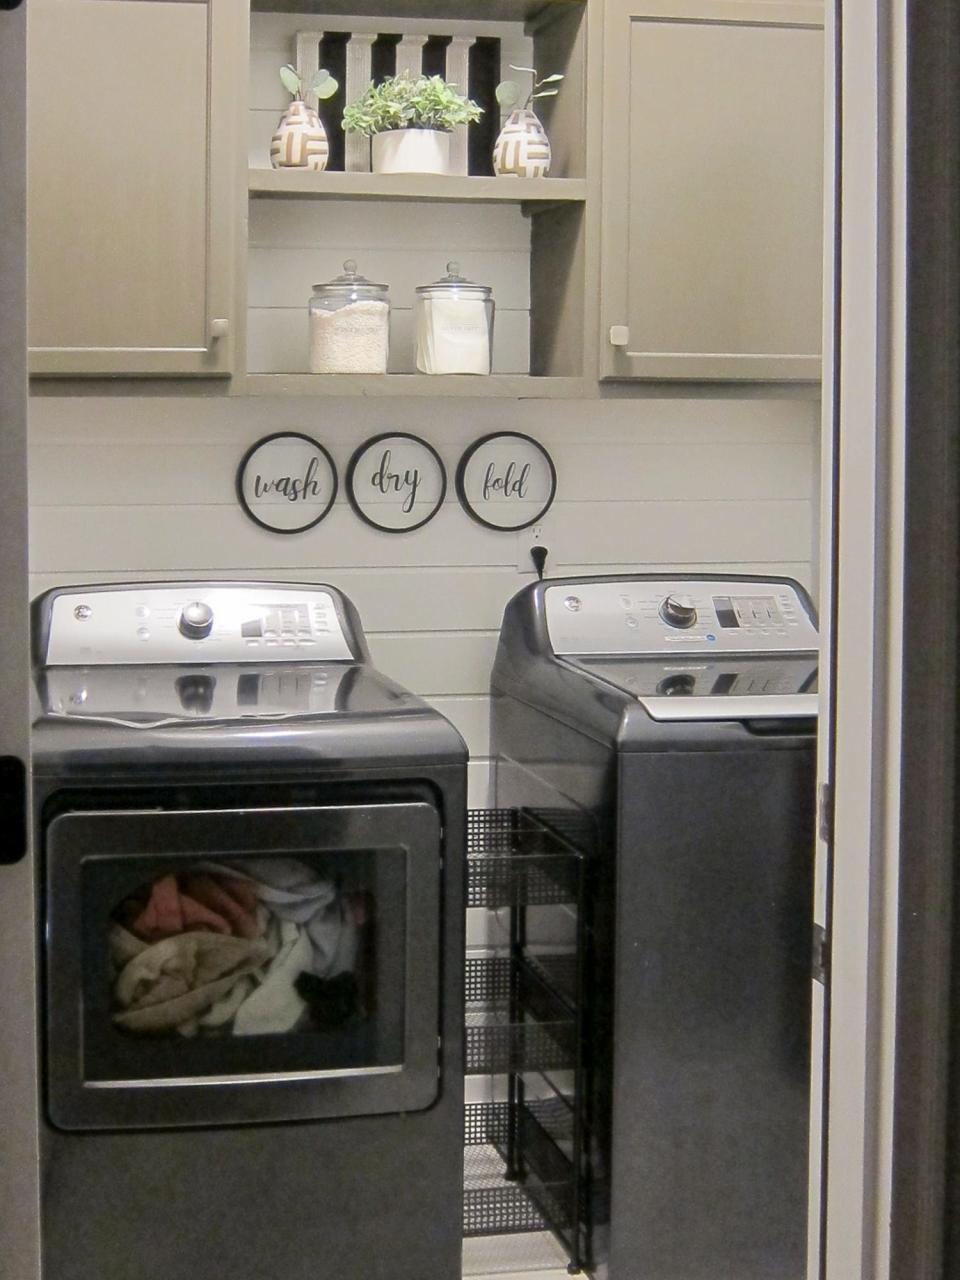 A dedicated laundry room makes the family's life more convenient.